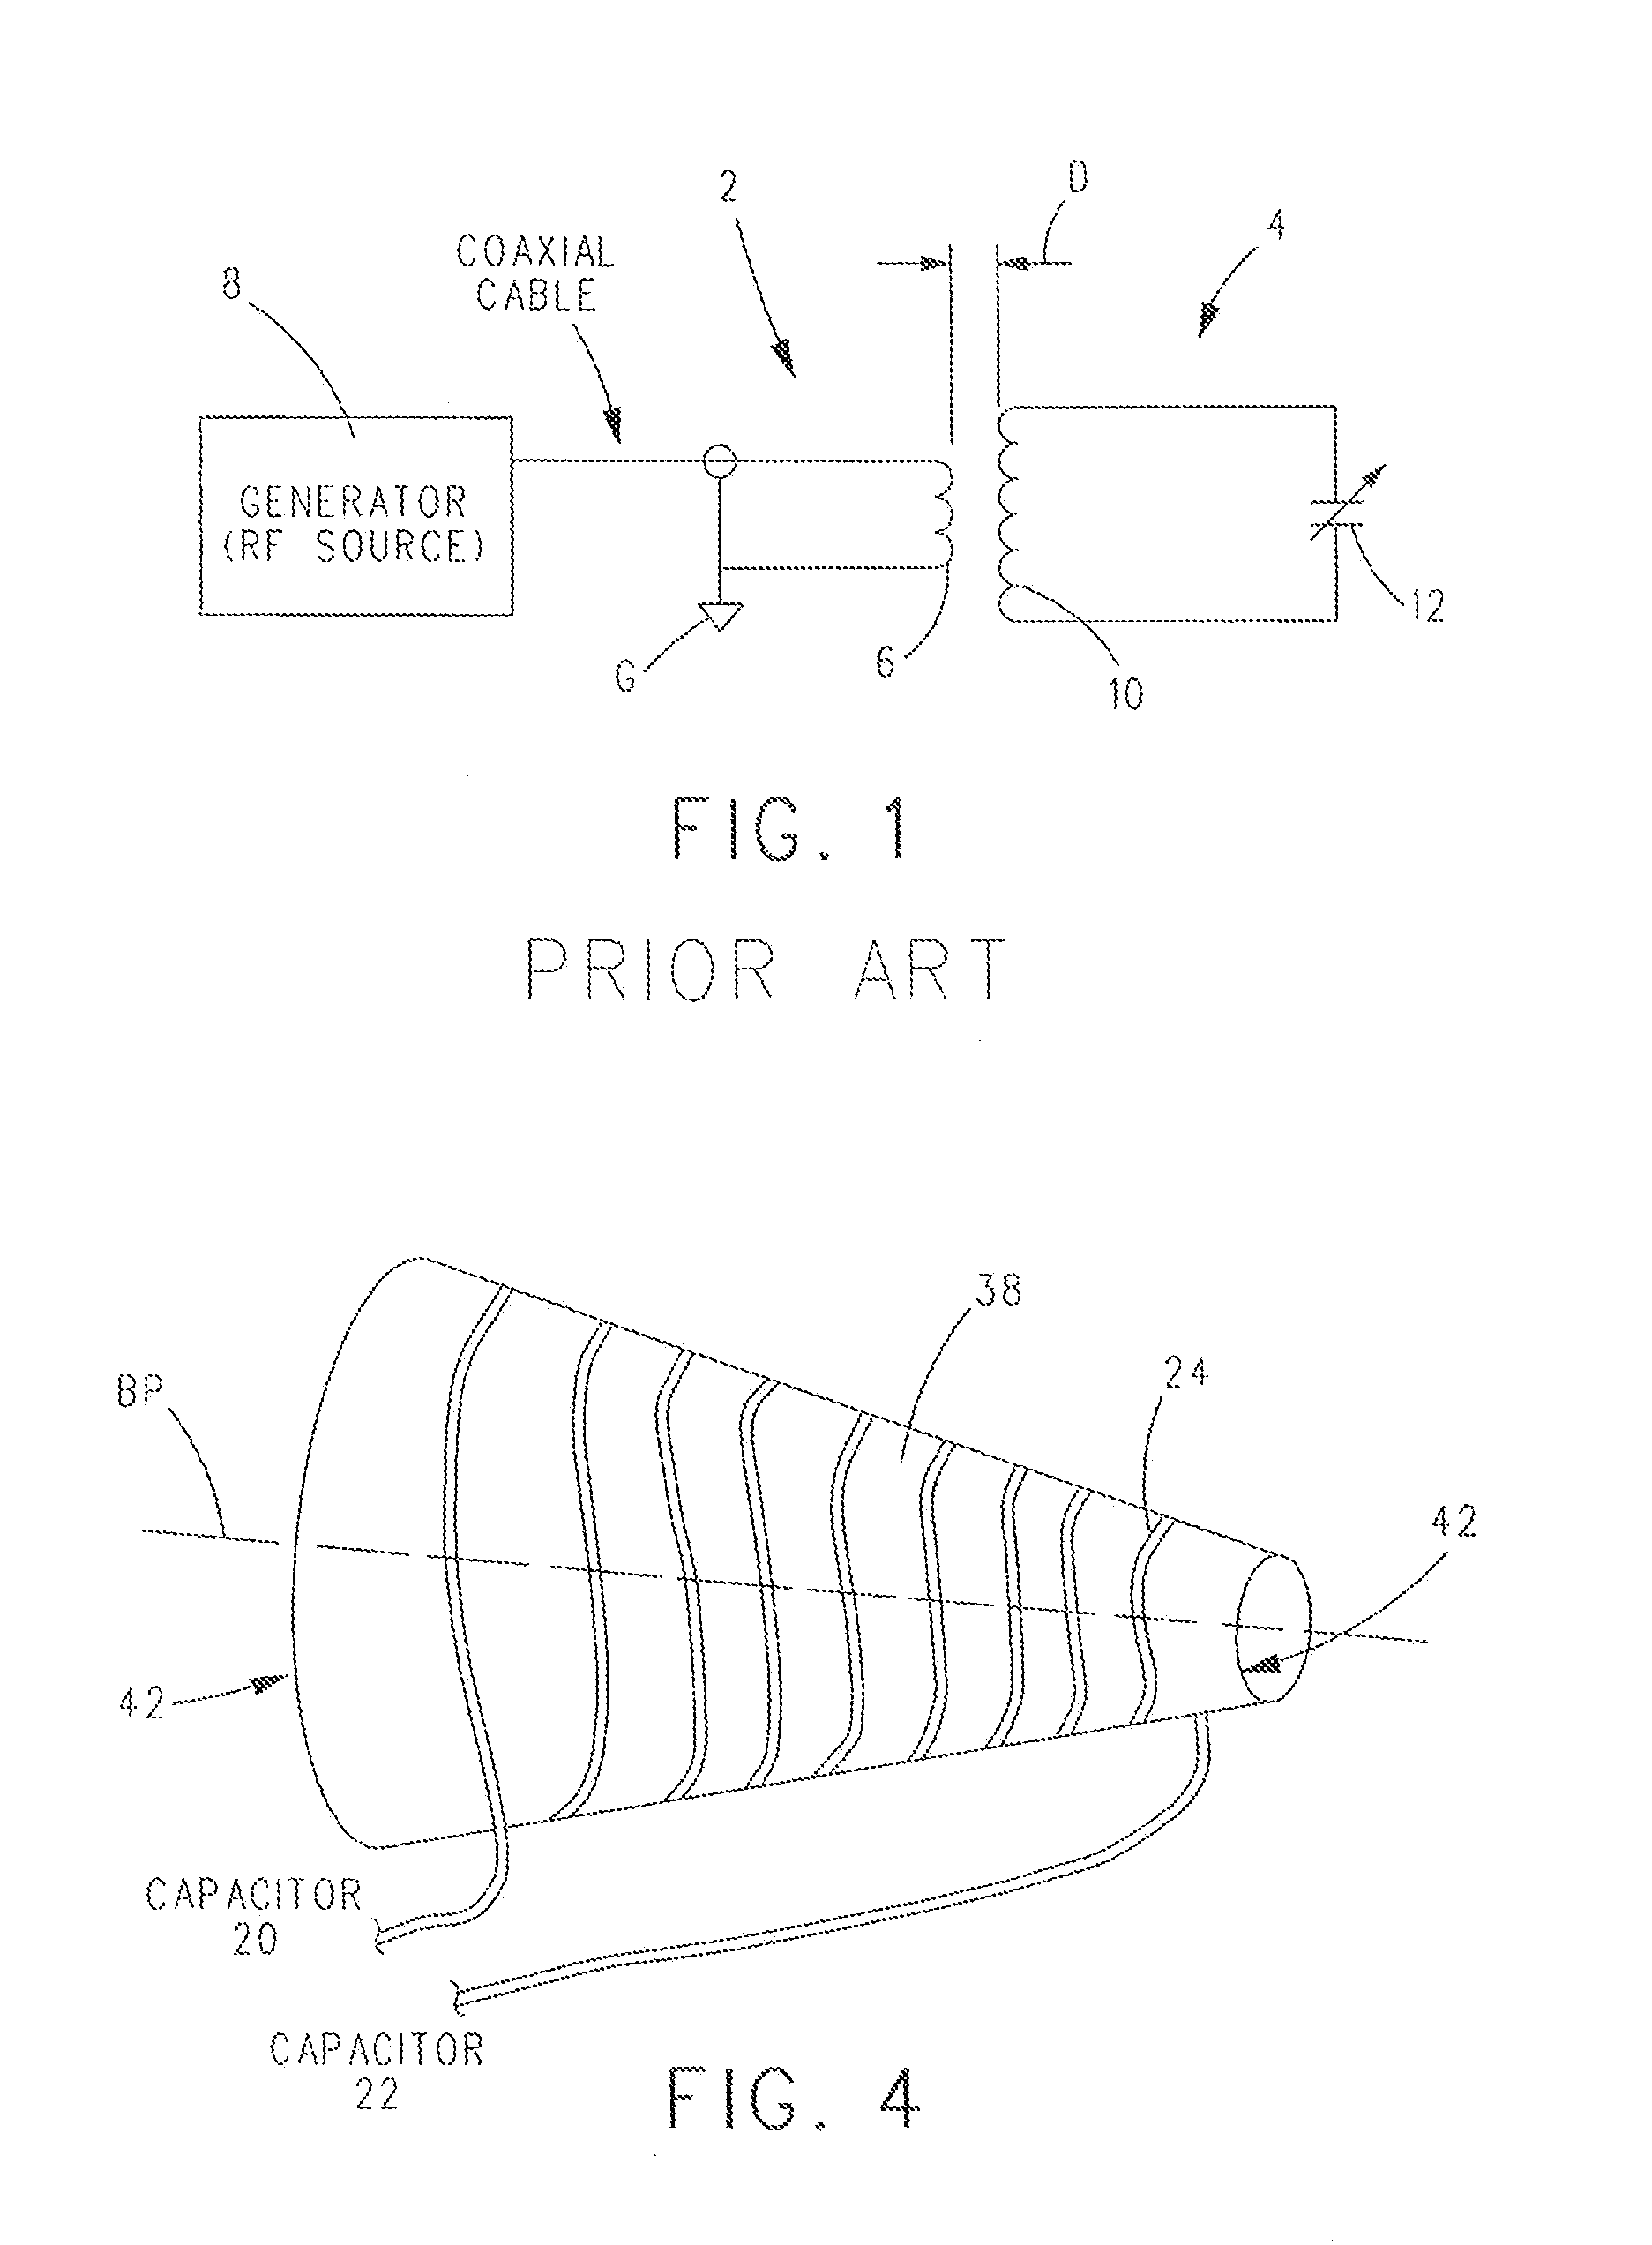 Coupling Method for Resonant Diathermy and Other Bio-Tissue Heating Applicators